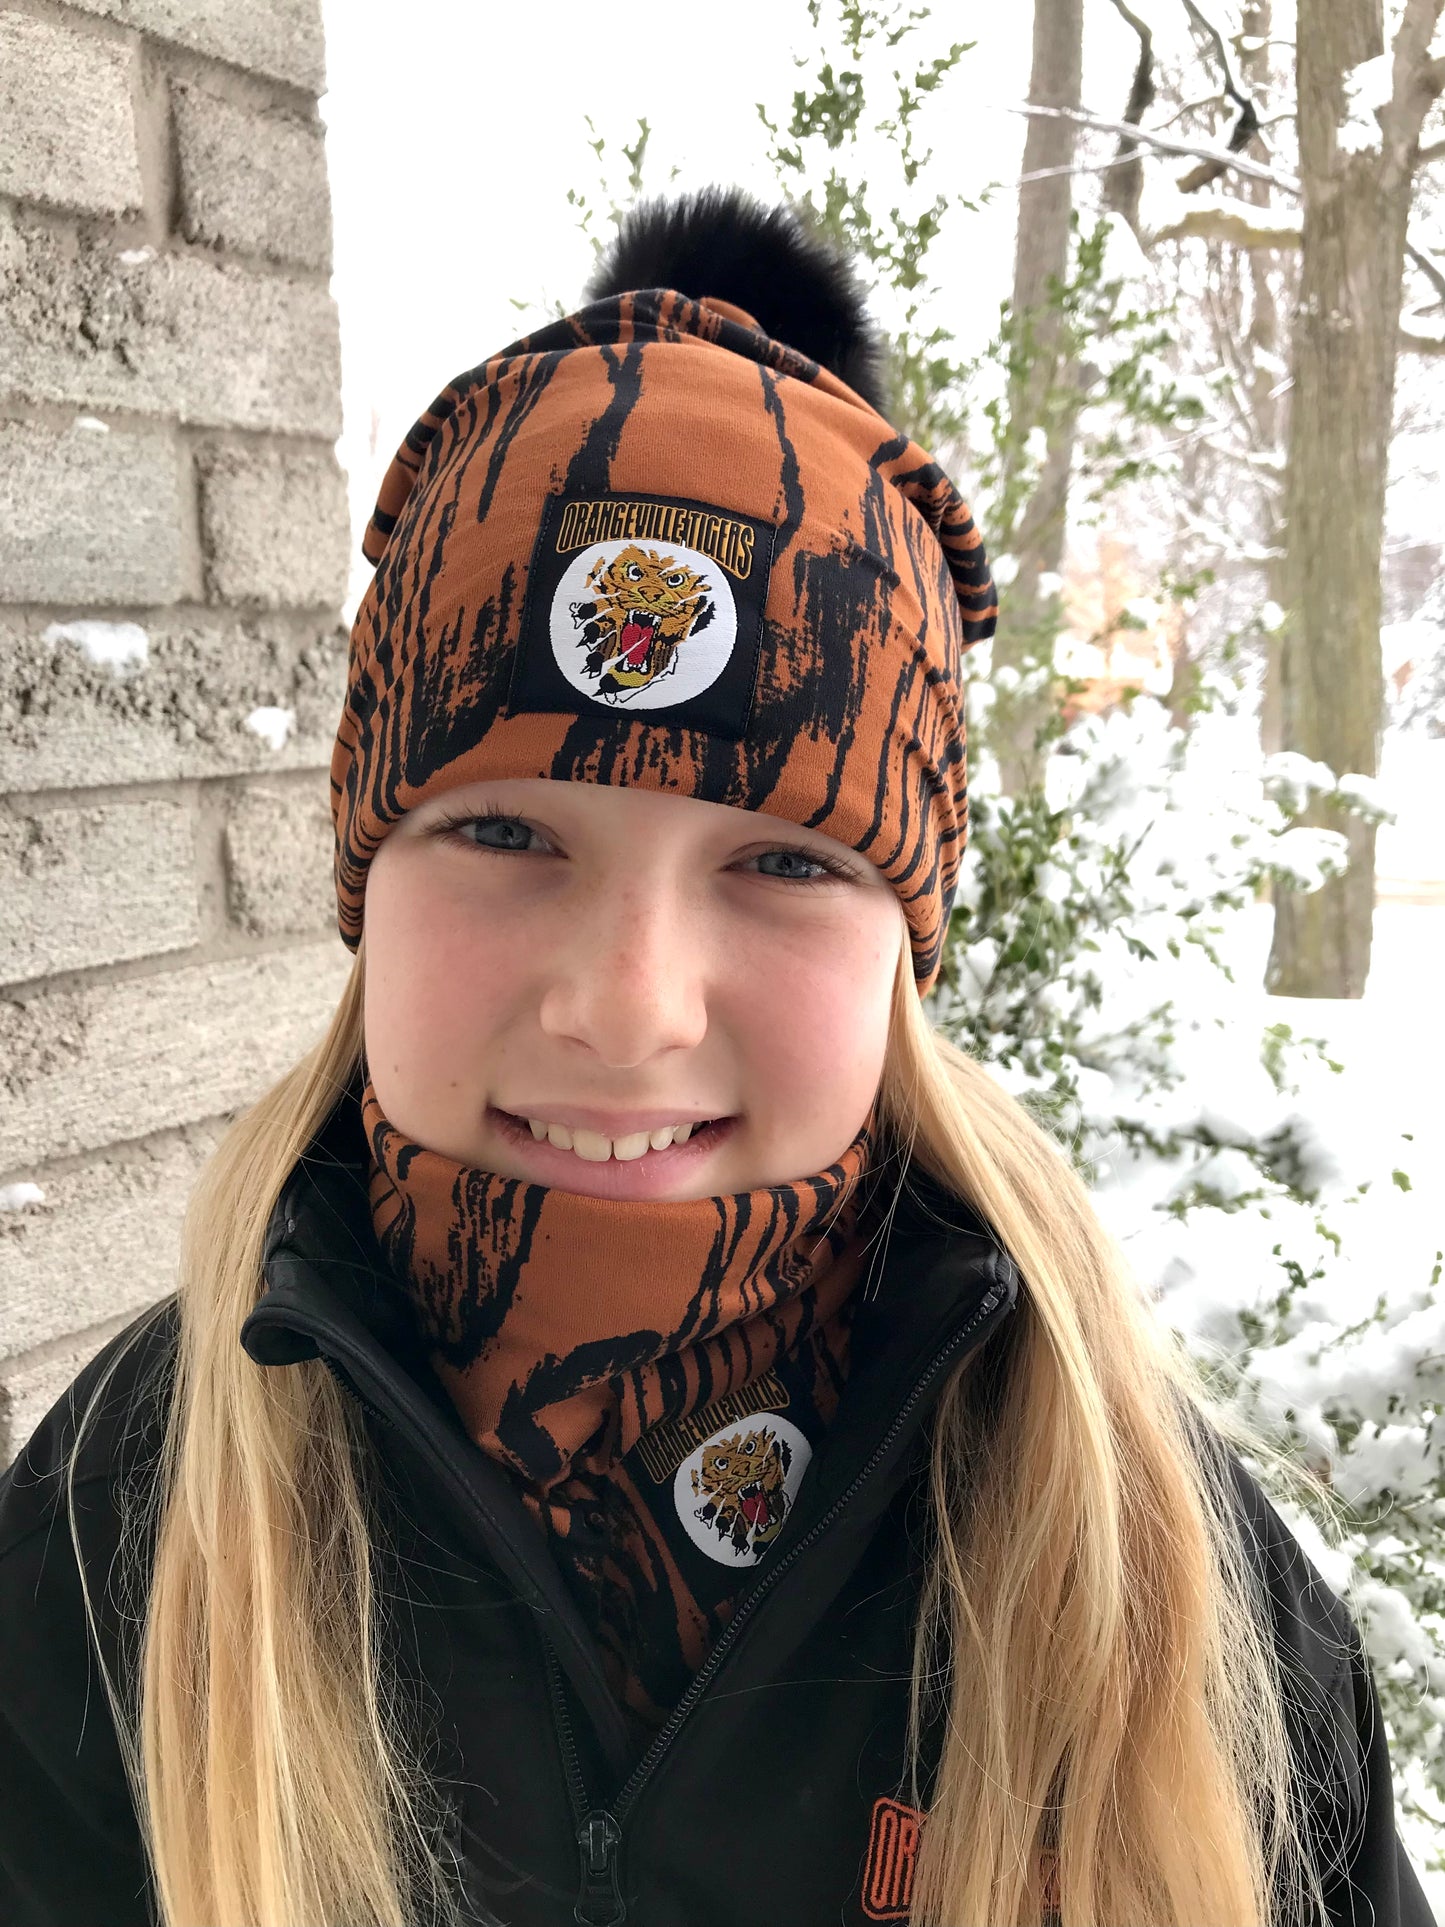 Orangeville Tigers Winter Bamboo Hats with recycled fur pompom